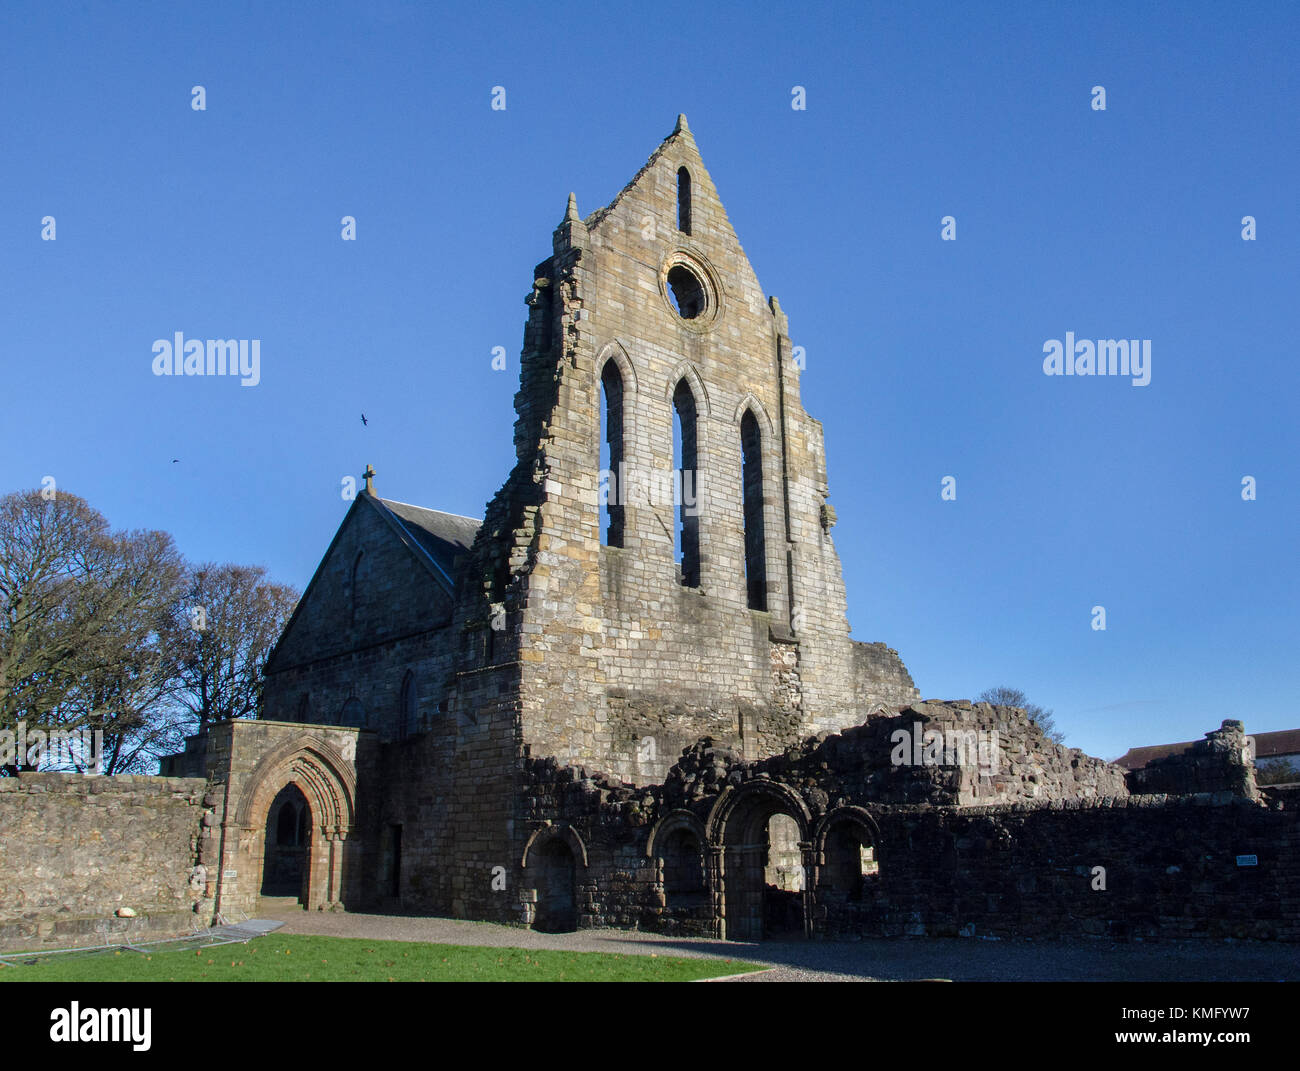 KILWINNING, SCOTLAND - NOVEMBER 12 2017: The ruins of Kilwinning Abbey which was home to the Tironensian monks, who lived there for 400 years. Stock Photo